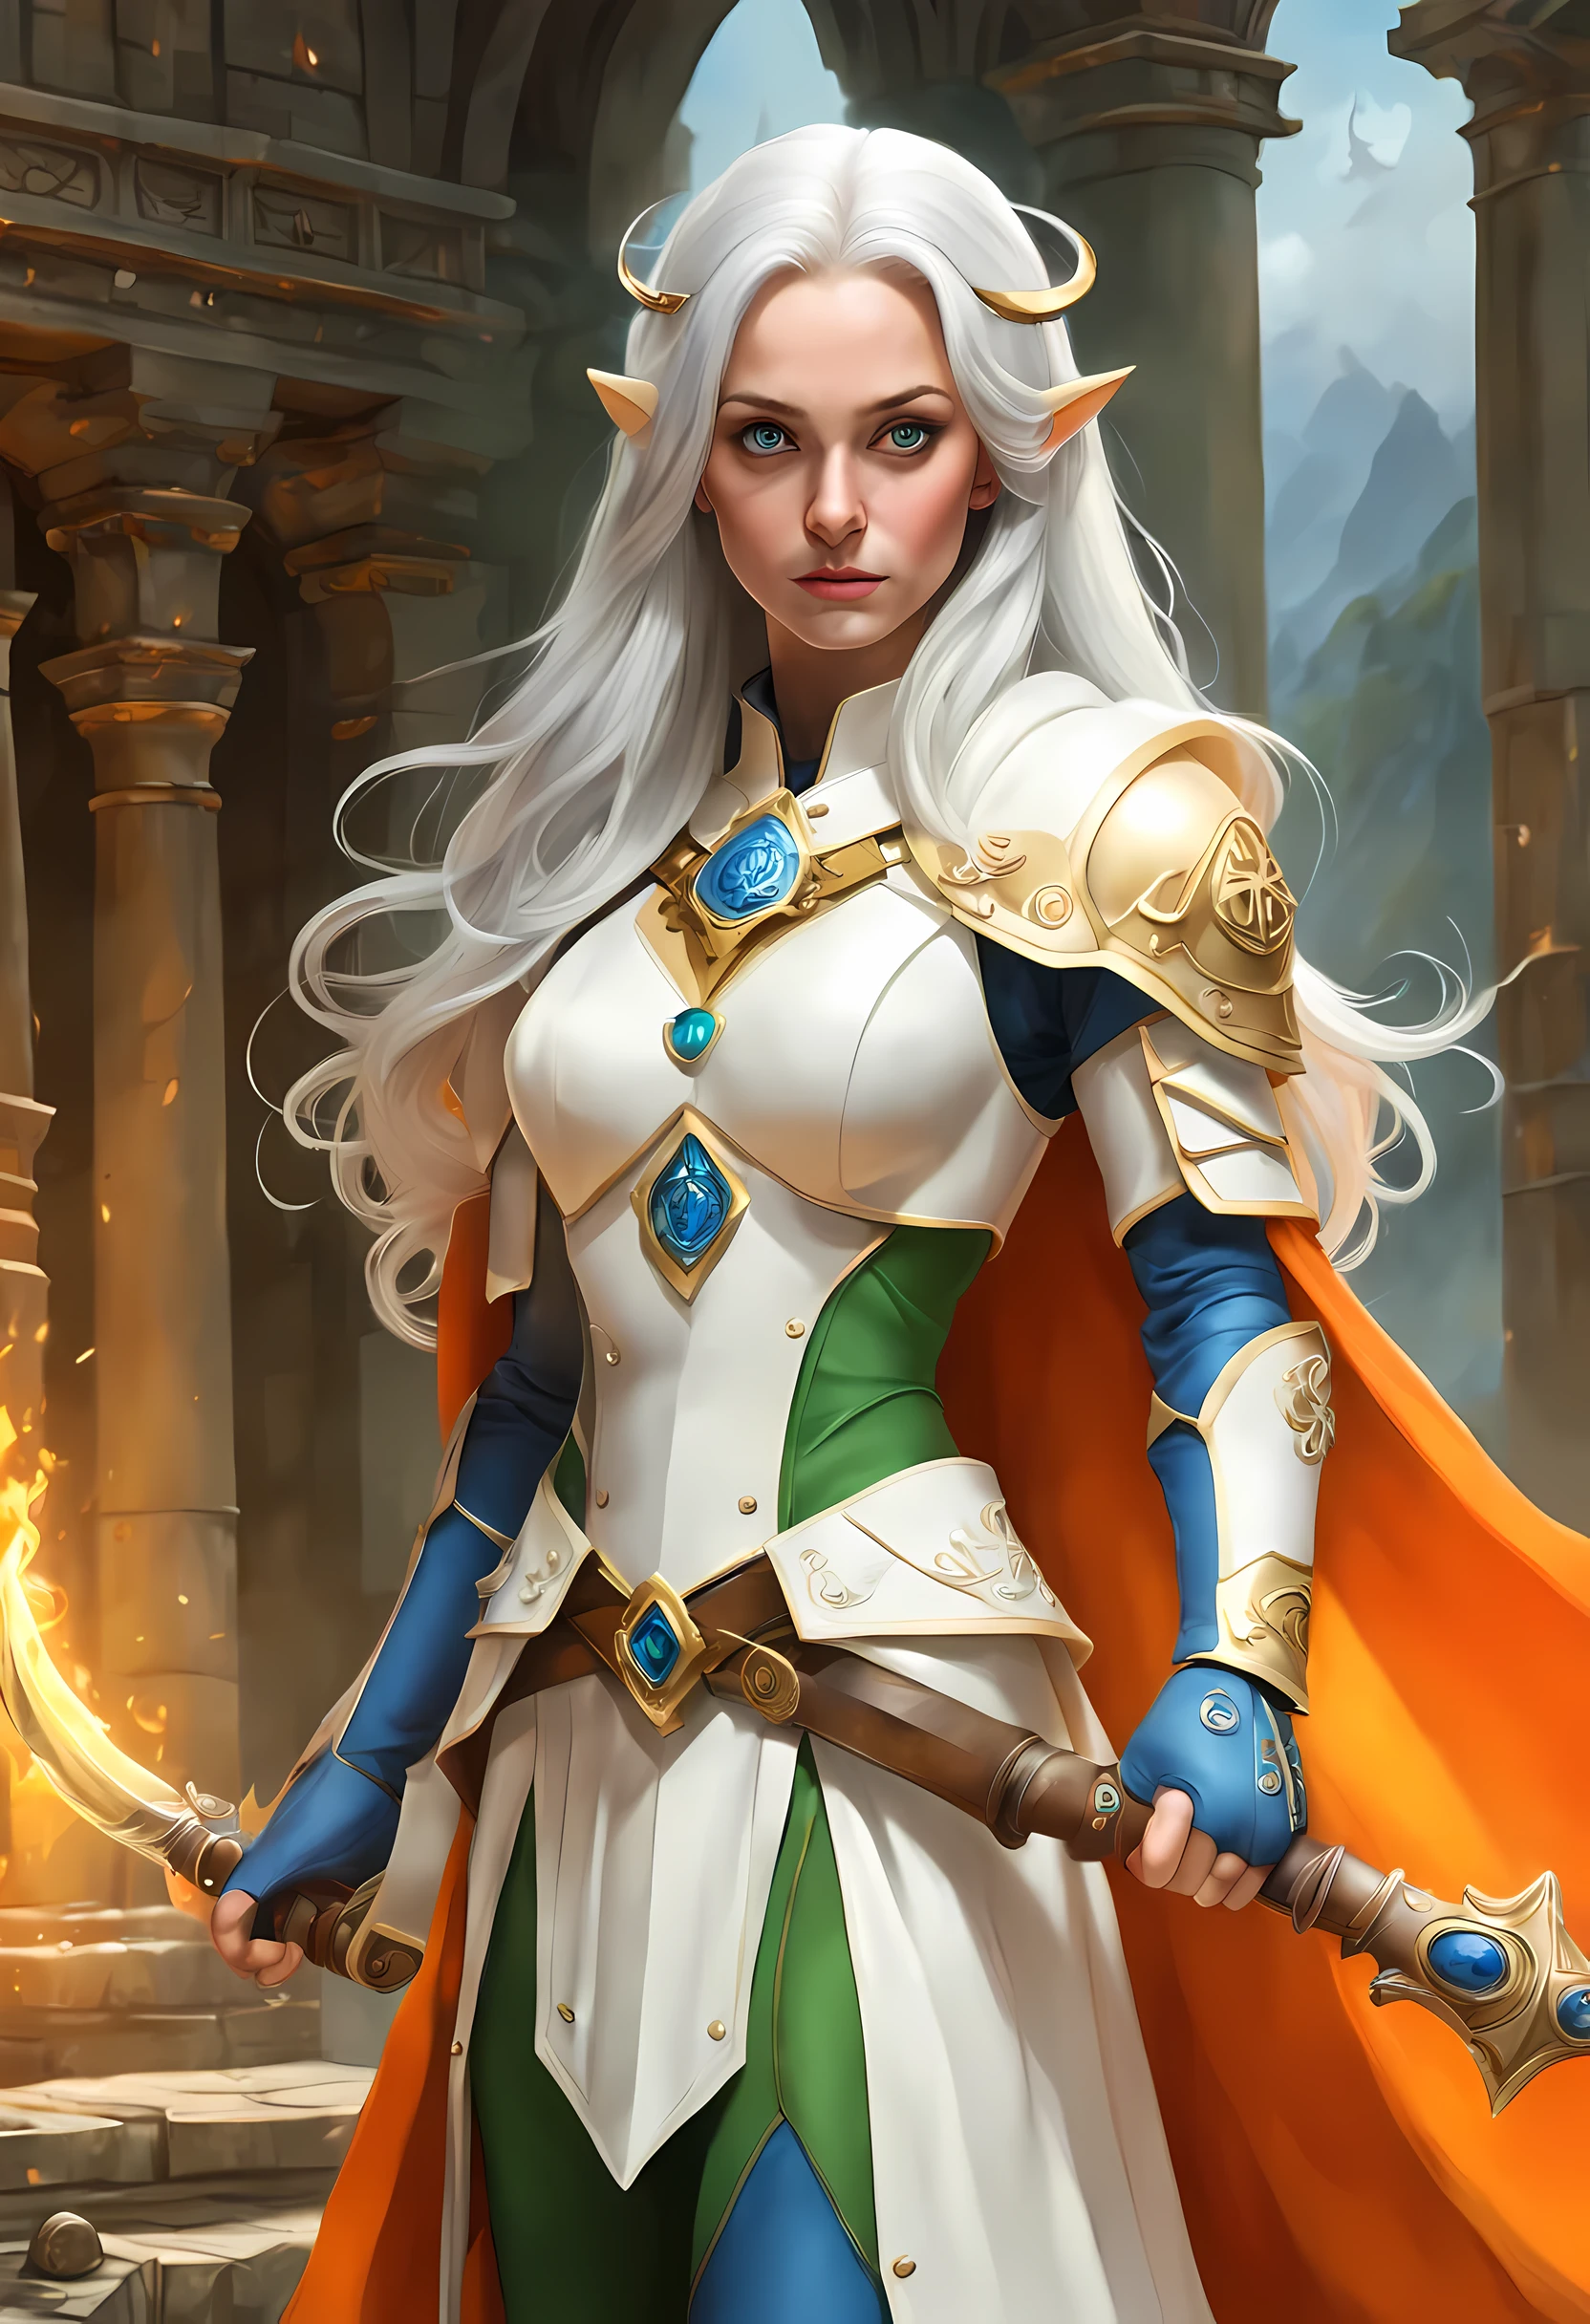 fAntAsy Art, dnd Art, RPG Art, Weitwinkelaufnahme, (mAsterpiece: 1.4) A (portrAit: 1.3) Intensiv detAils, highly detAiled, photoreAlistic, best quAlity, highres, portrAit A femAle (fAntAsy Art, MAsterpiece, best quAlity: 1.3) bl3uprint (Blau skin: 1.5, Intensiv detAils fAciAl detAils, exquisite beAuty, (fAntAsy Art, MAsterpiece, best quAlity) Kleriker, (Blau: 1.3) skinned femAle, (Weiß hAir: 1.3), long hAir, Intensiv (Grün: 1.3) Auge, fAntAsy Art, MAsterpiece, best quAlity) Armed A fiery sword red fire, weAring heAvy (Weiß: 1.3) hAlf plAte mAil Armor, weAring high heeled lAced boots, weAring An(orAnge :1.3) cloAk, weAring glowing holy symbol GlowingRunes_Gelb, within fAntAsy temple bAckground, Reflexionslicht, high detAils, best quAlity, 16k, [ultrA detAiled], mAsterpiece, best quAlity, (extremely detAiled), Nahaufnahme, ultrA Weitwinkelaufnahme, photoreAlistic, roh, fAntAsy Art, dnd Art, fAntAsy Art, reAlistic Art,((best quAlity)), ((mAsterpiece)), (detAiled), perfect fAce, ((no eArs: 1.6))